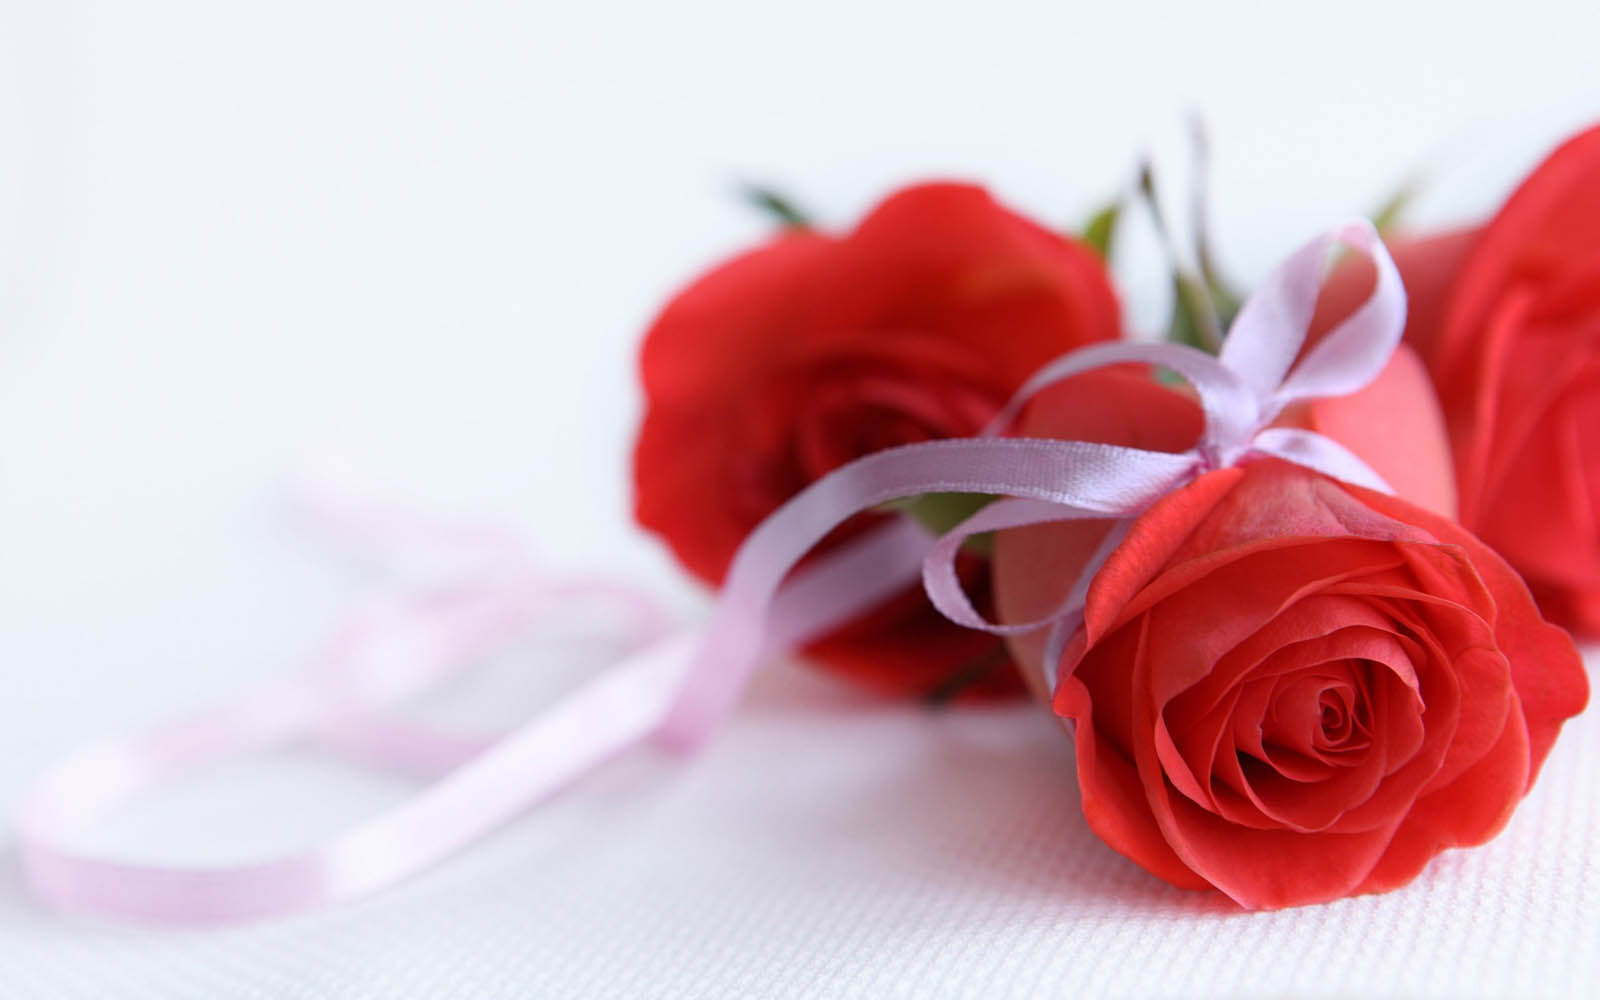 Tag Red Rose Wallpaper Image Photos Pictures And Background For